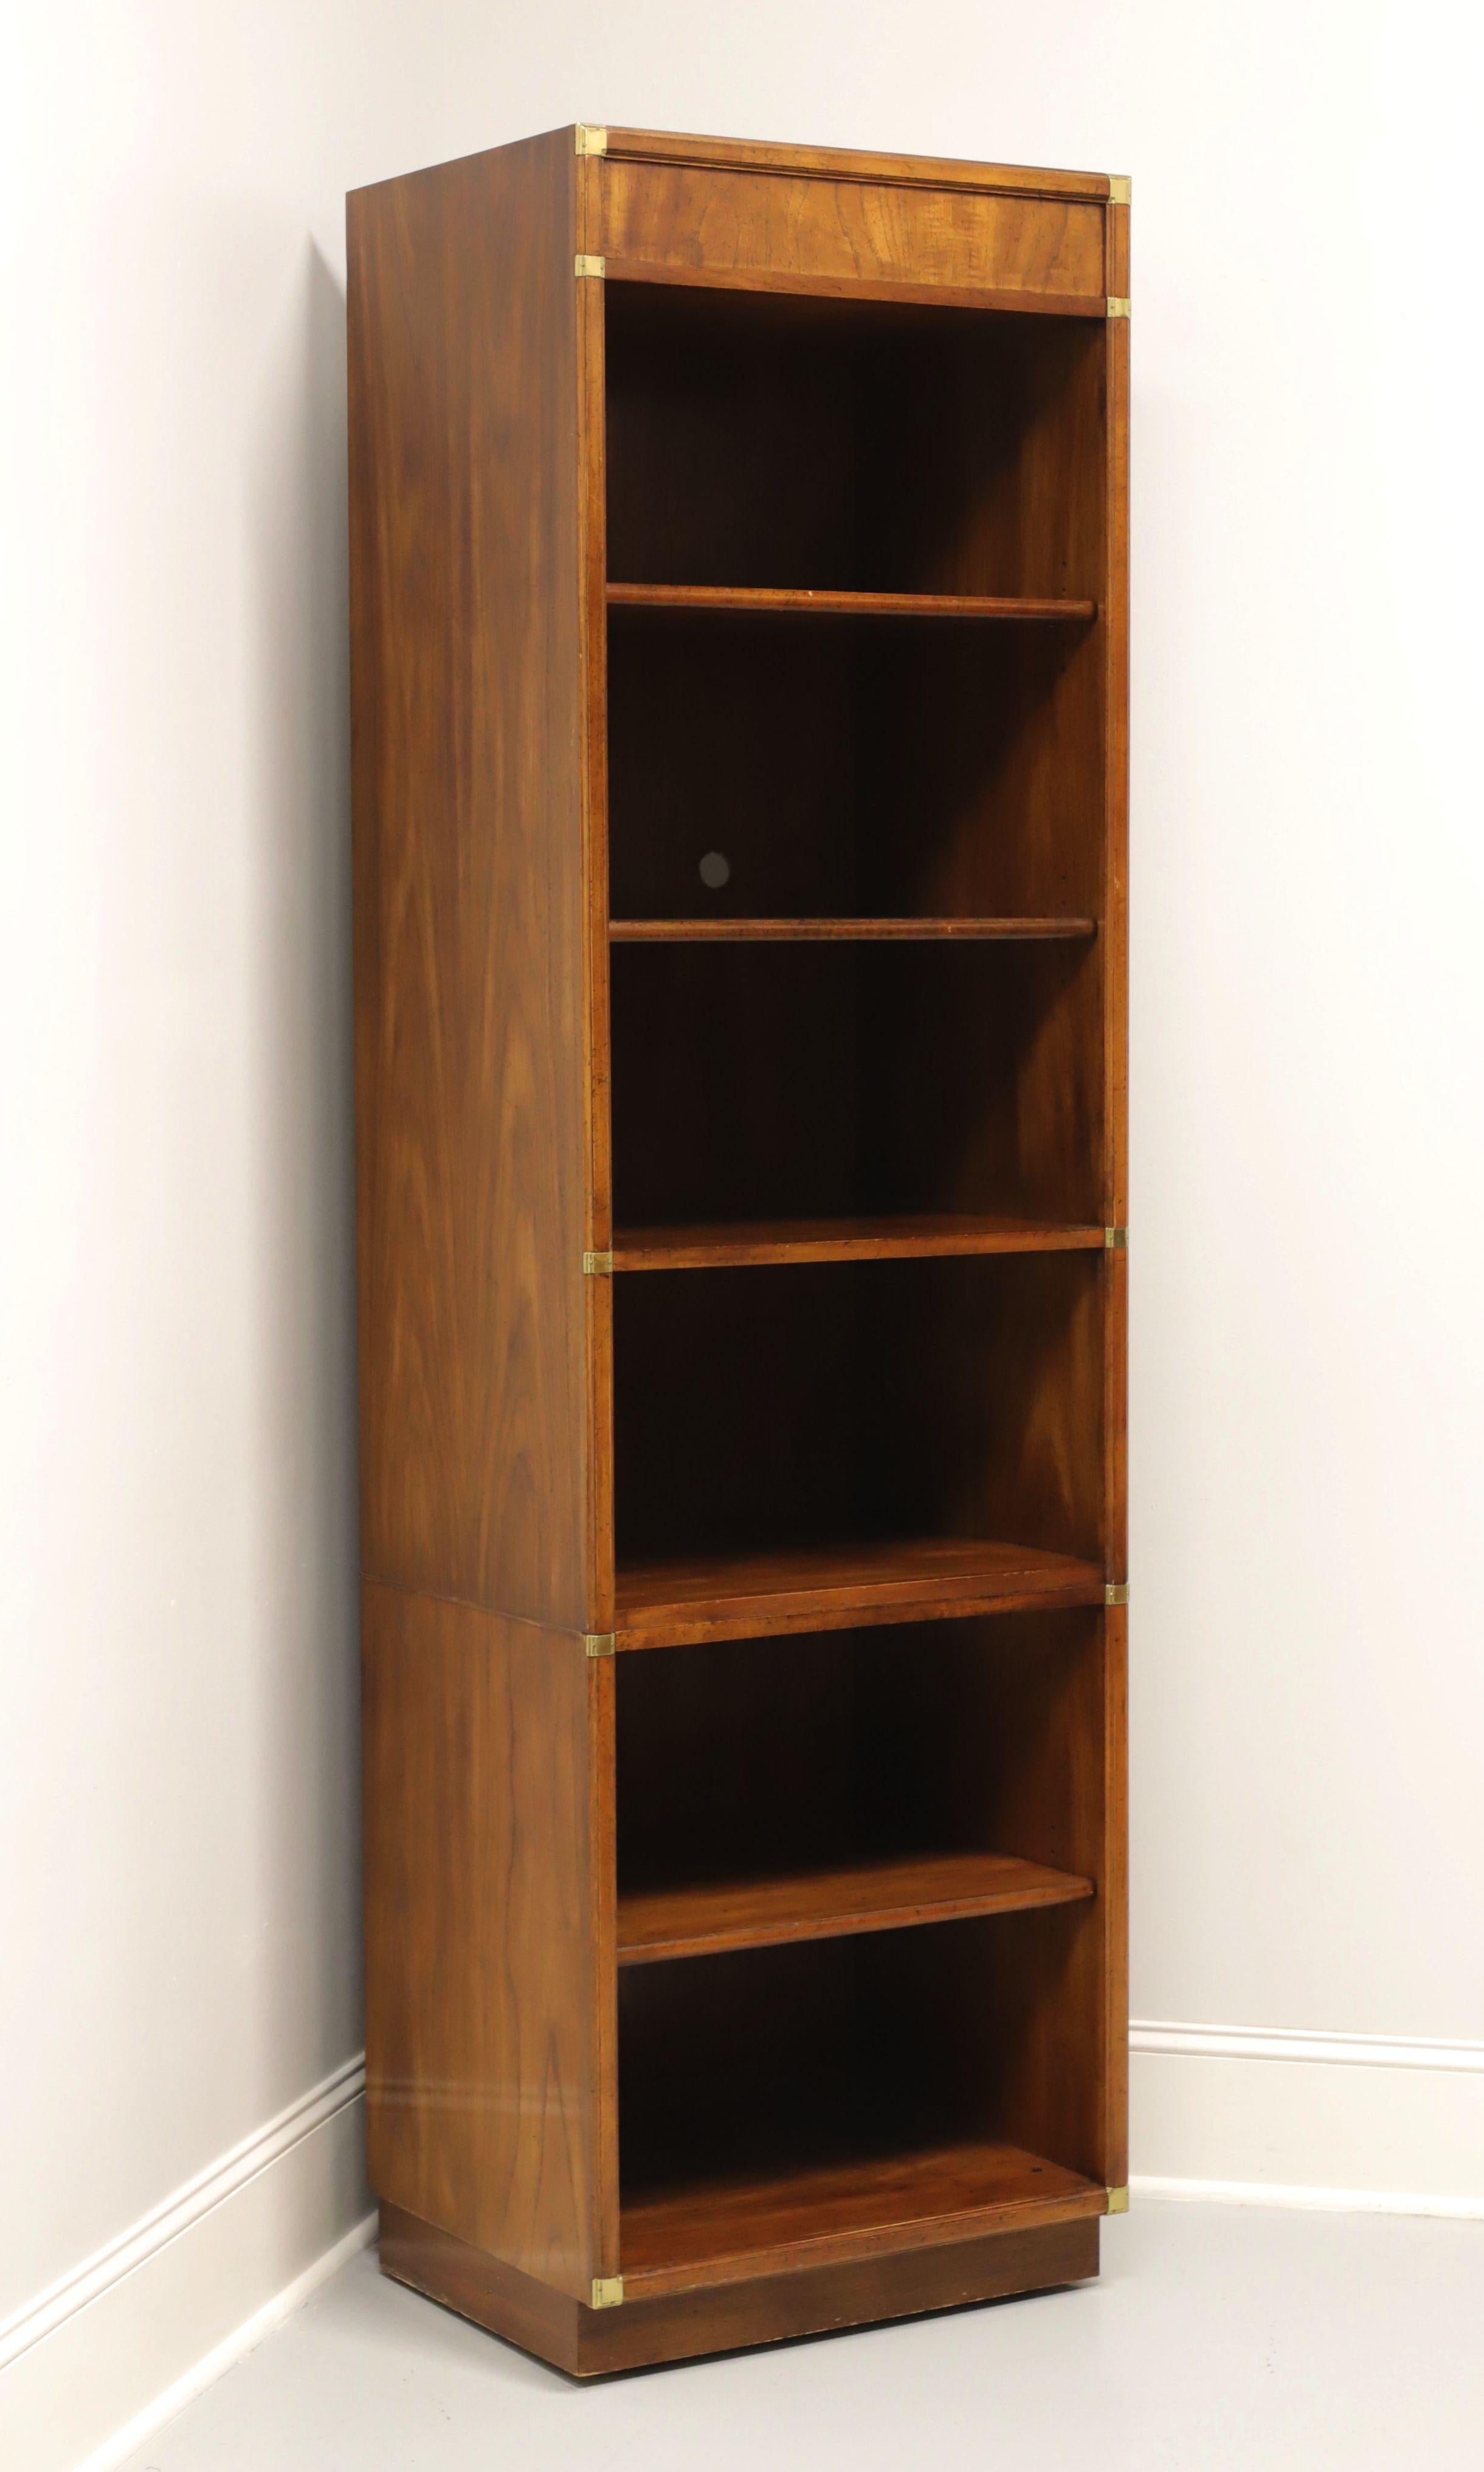 GORDON'S Late 20th Century Campaign Style Shelving Unit - B For Sale 2